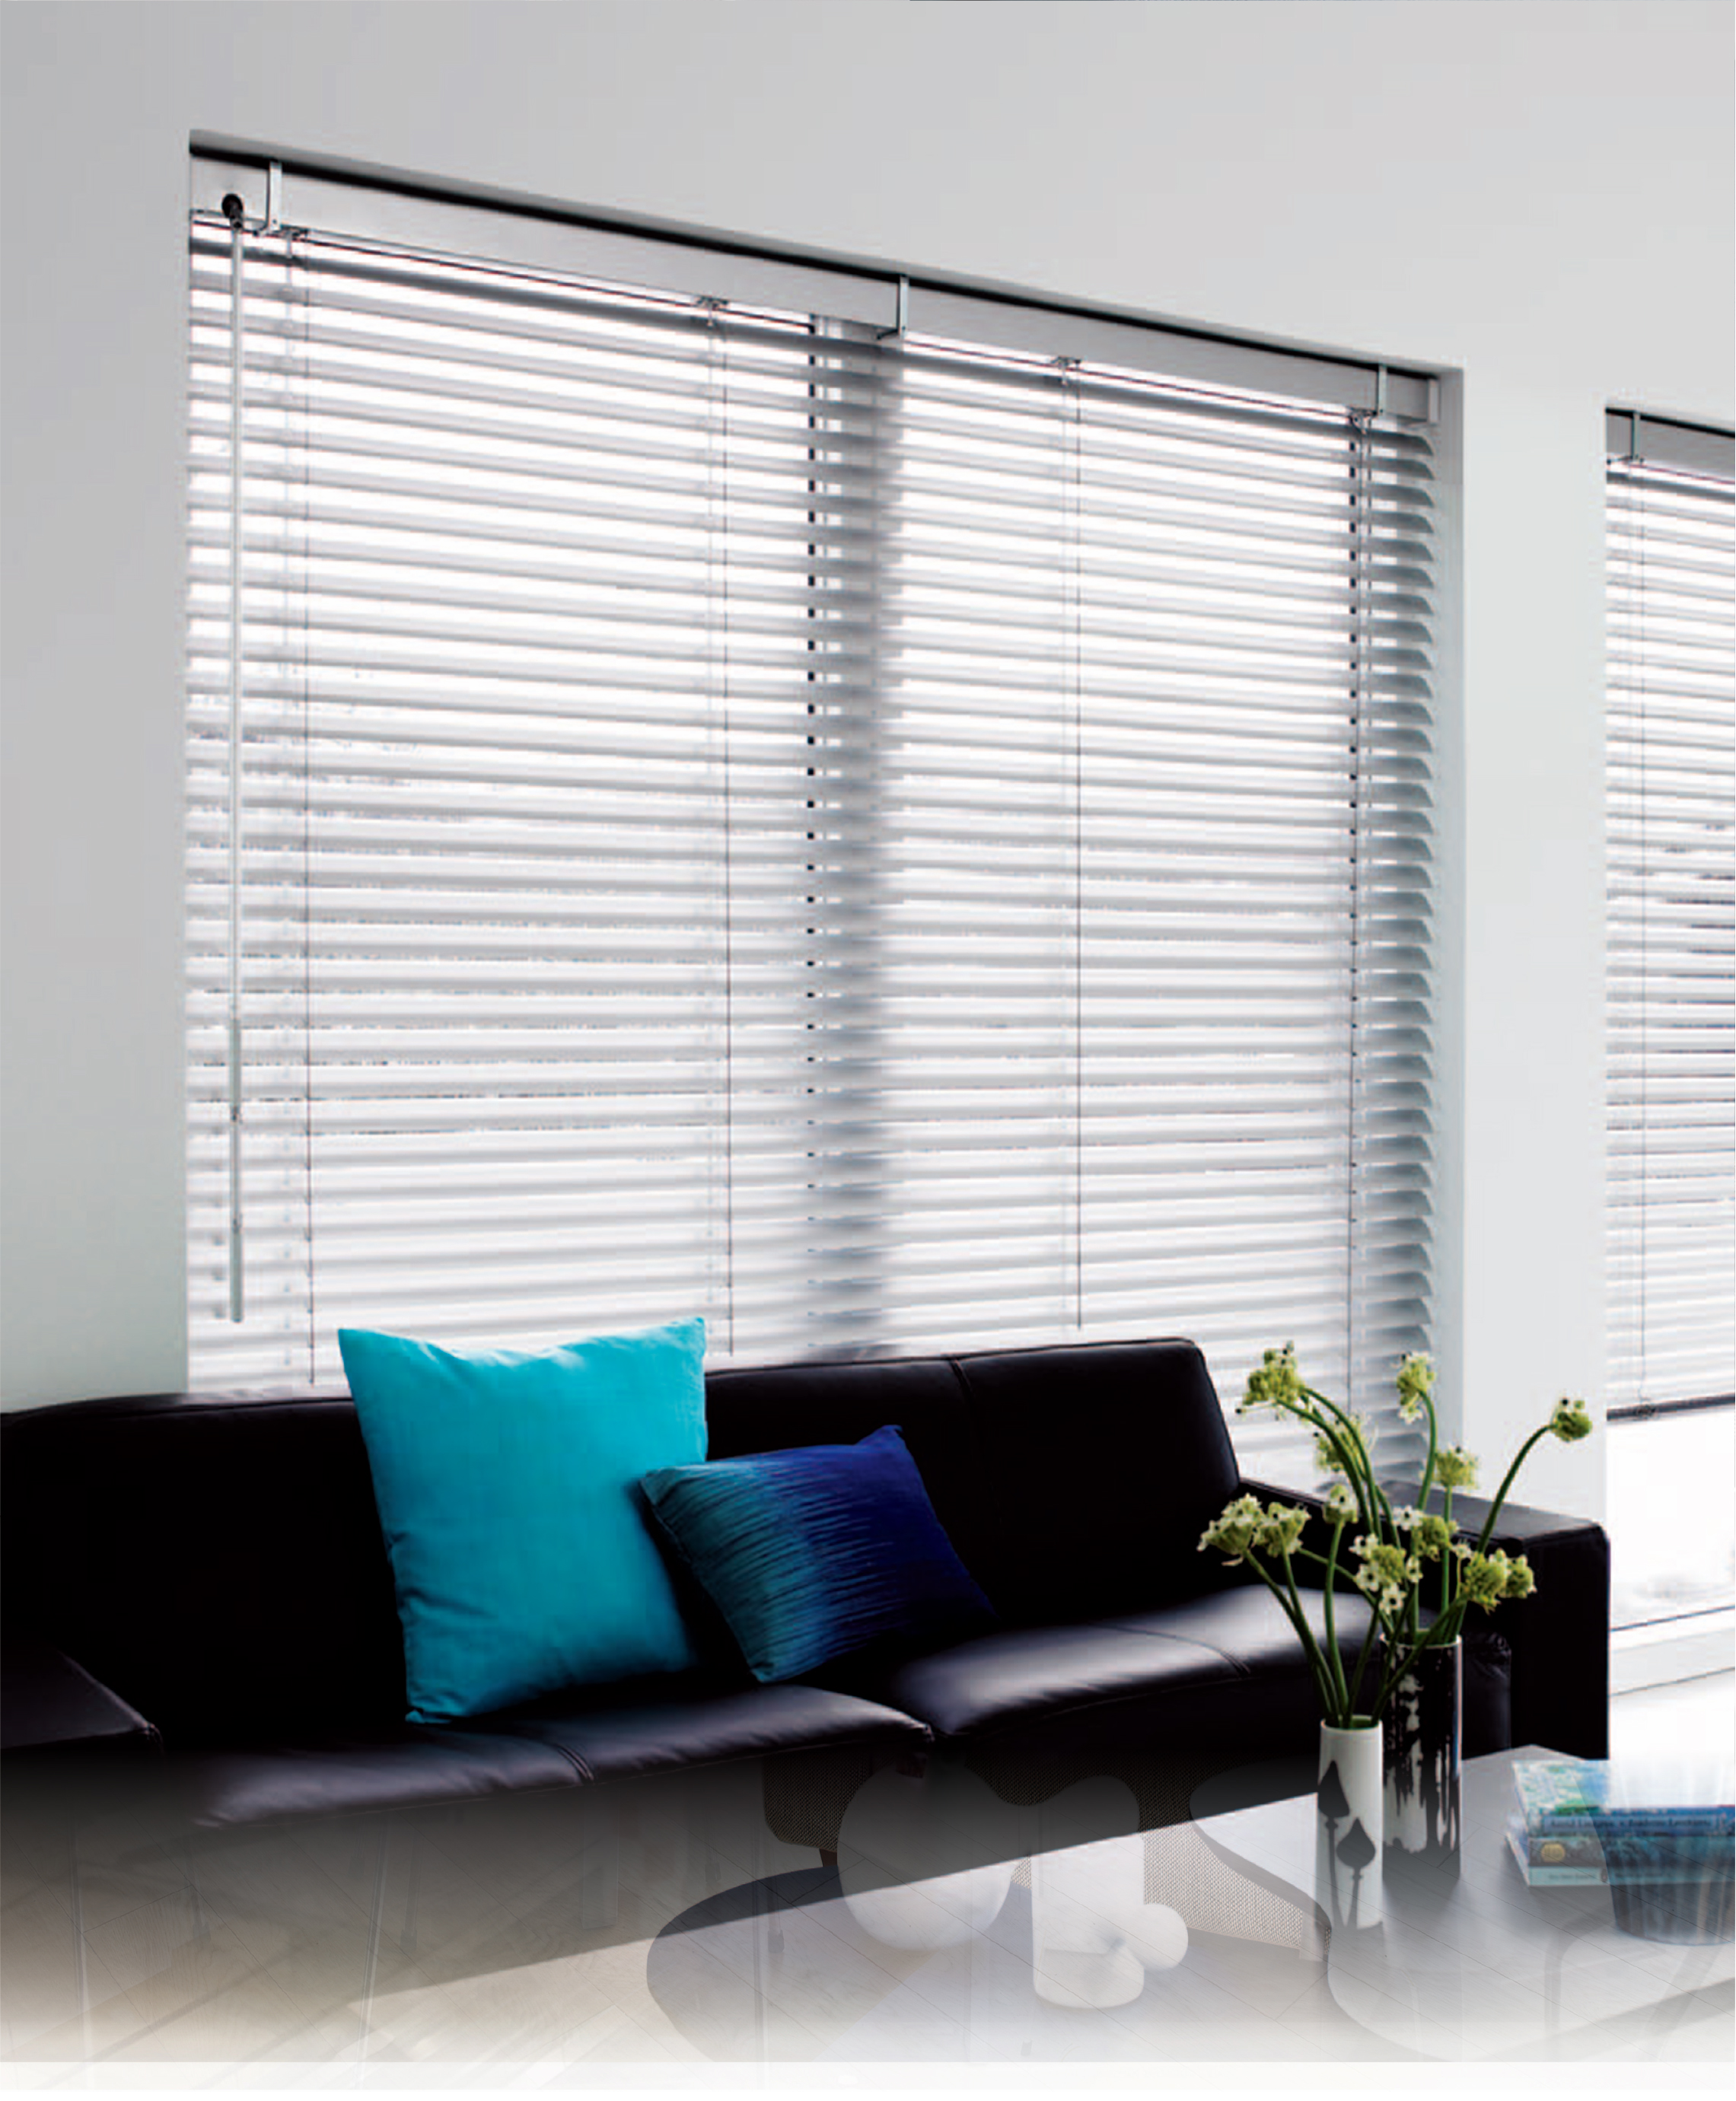 Benefits of having window shutters on your premisesThermal and sound insulation